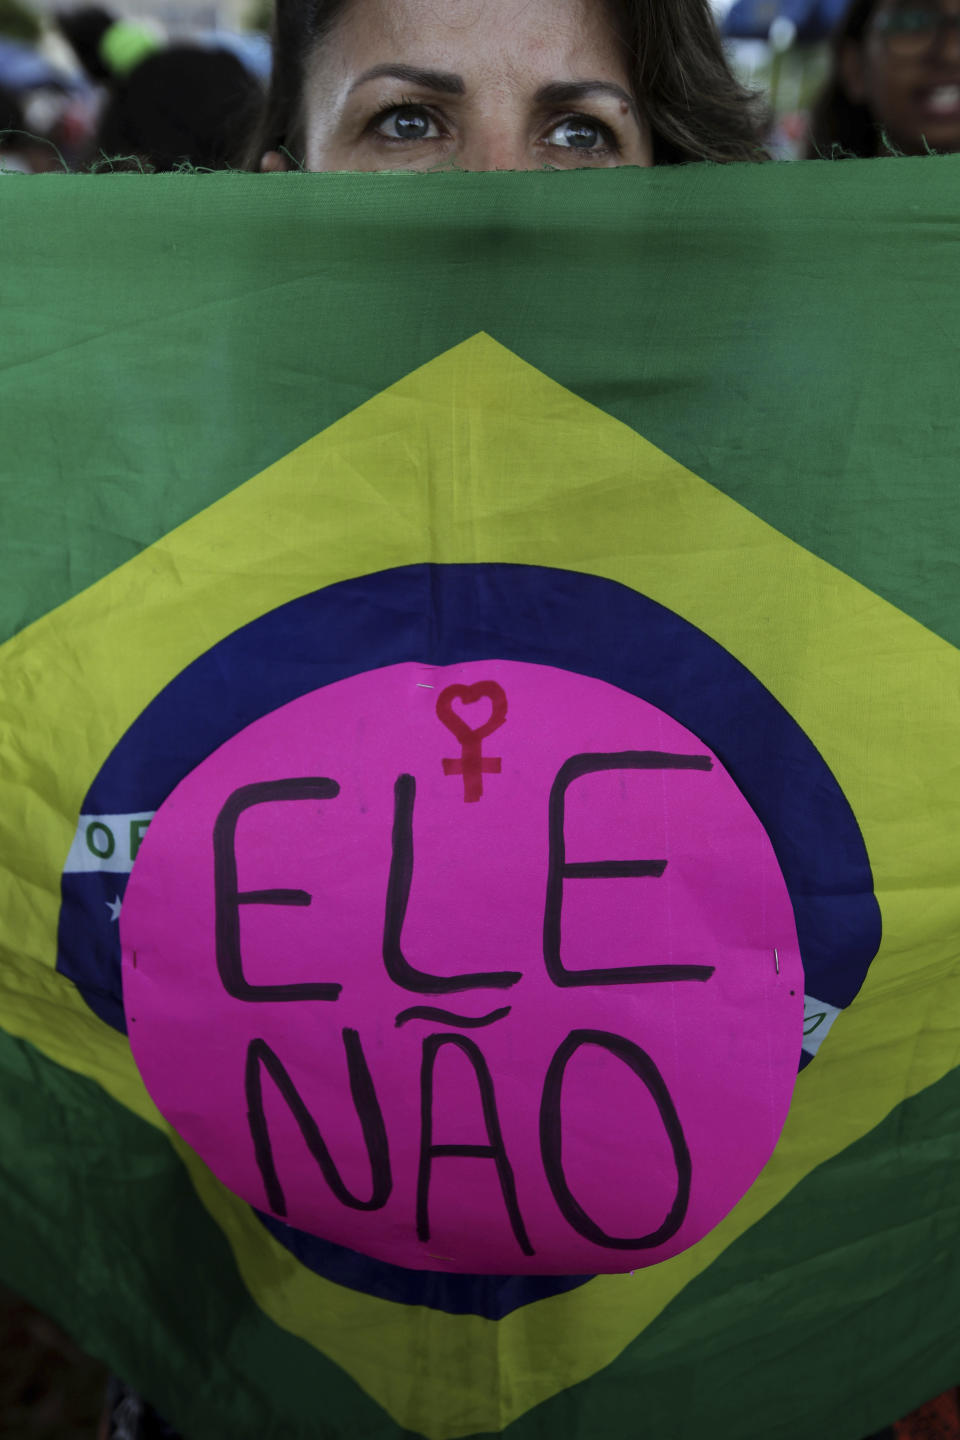 A woman shows a Brazilian flag with text written on it that reads in Portuguese "Not him" during a protest called "Women against Bolsonaro," in Brasilia, Brazil, on Saturday, Oct. 20, 2018. Women and left-wing militants held protests across the country against the right-wing presidential candidate Jair Bolsonaro. (AP Photo/Eraldo Peres)